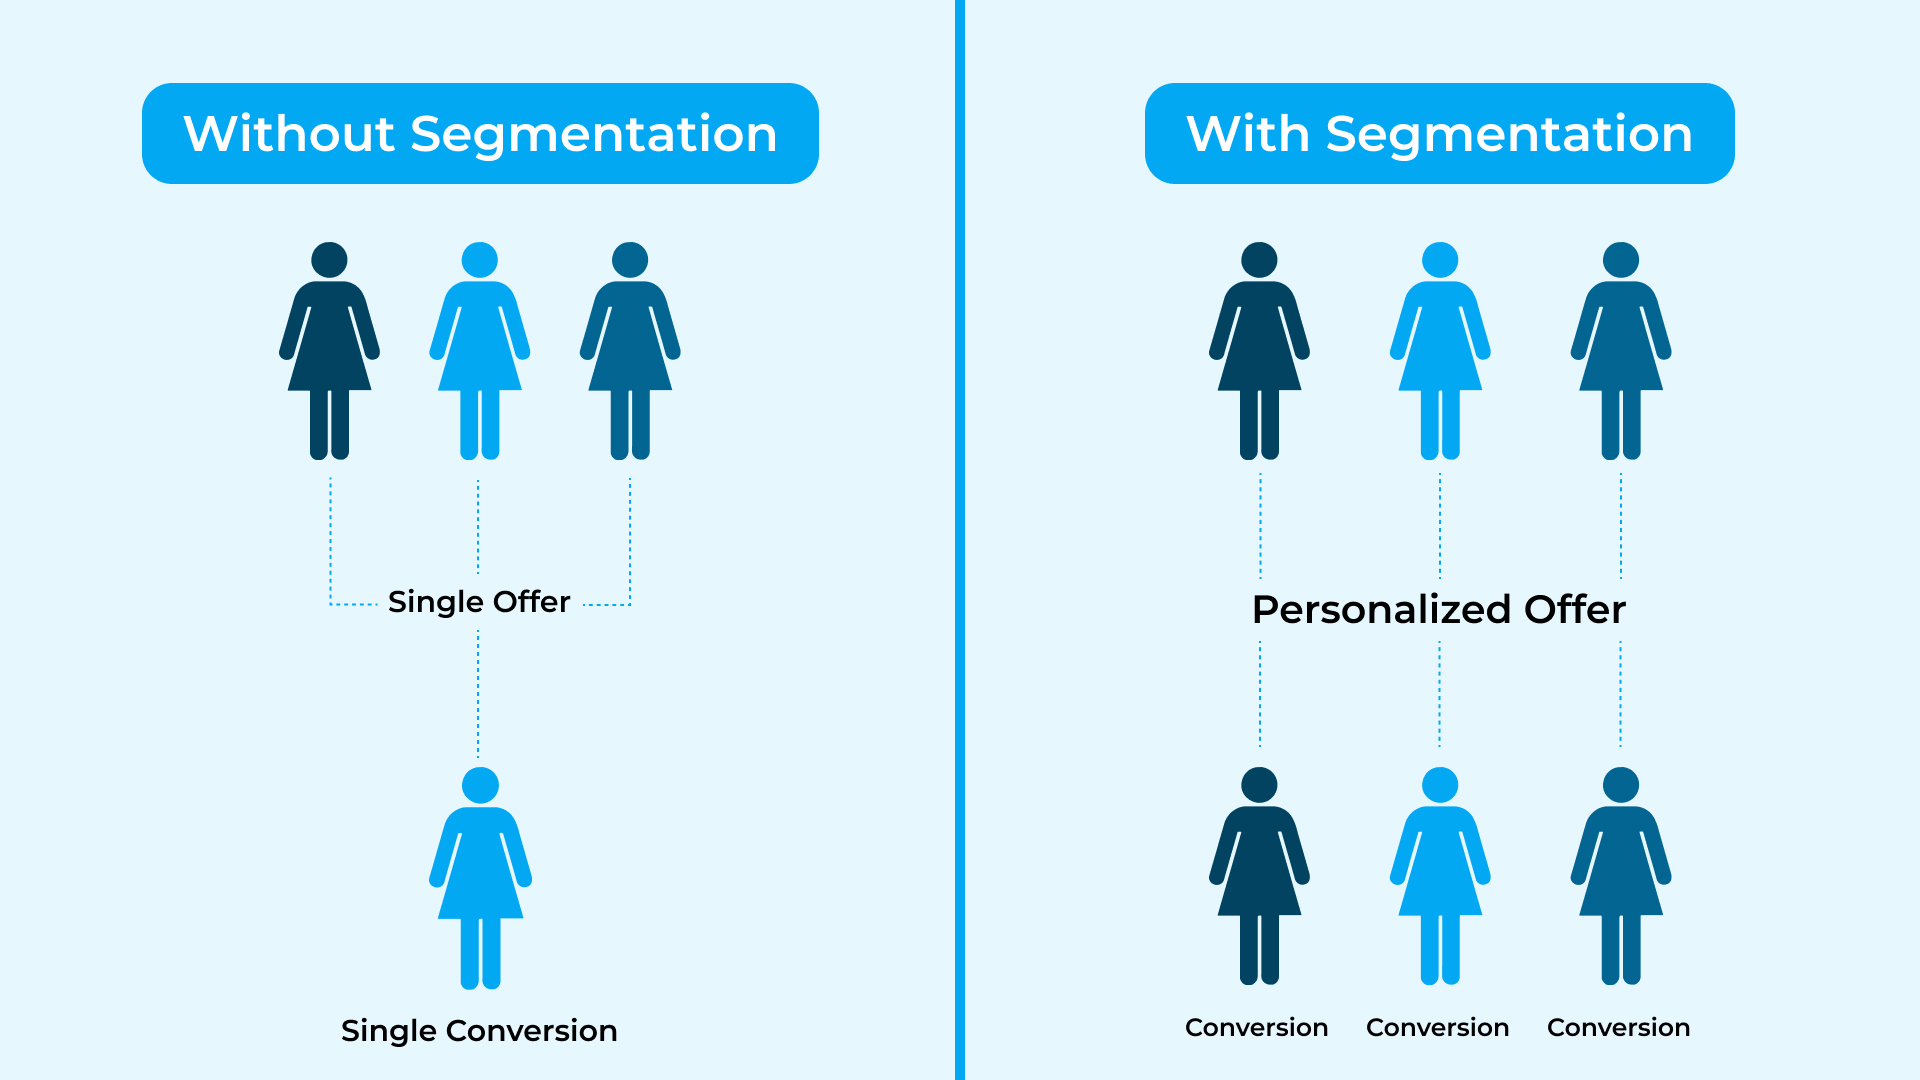 With or Without User Segmentation